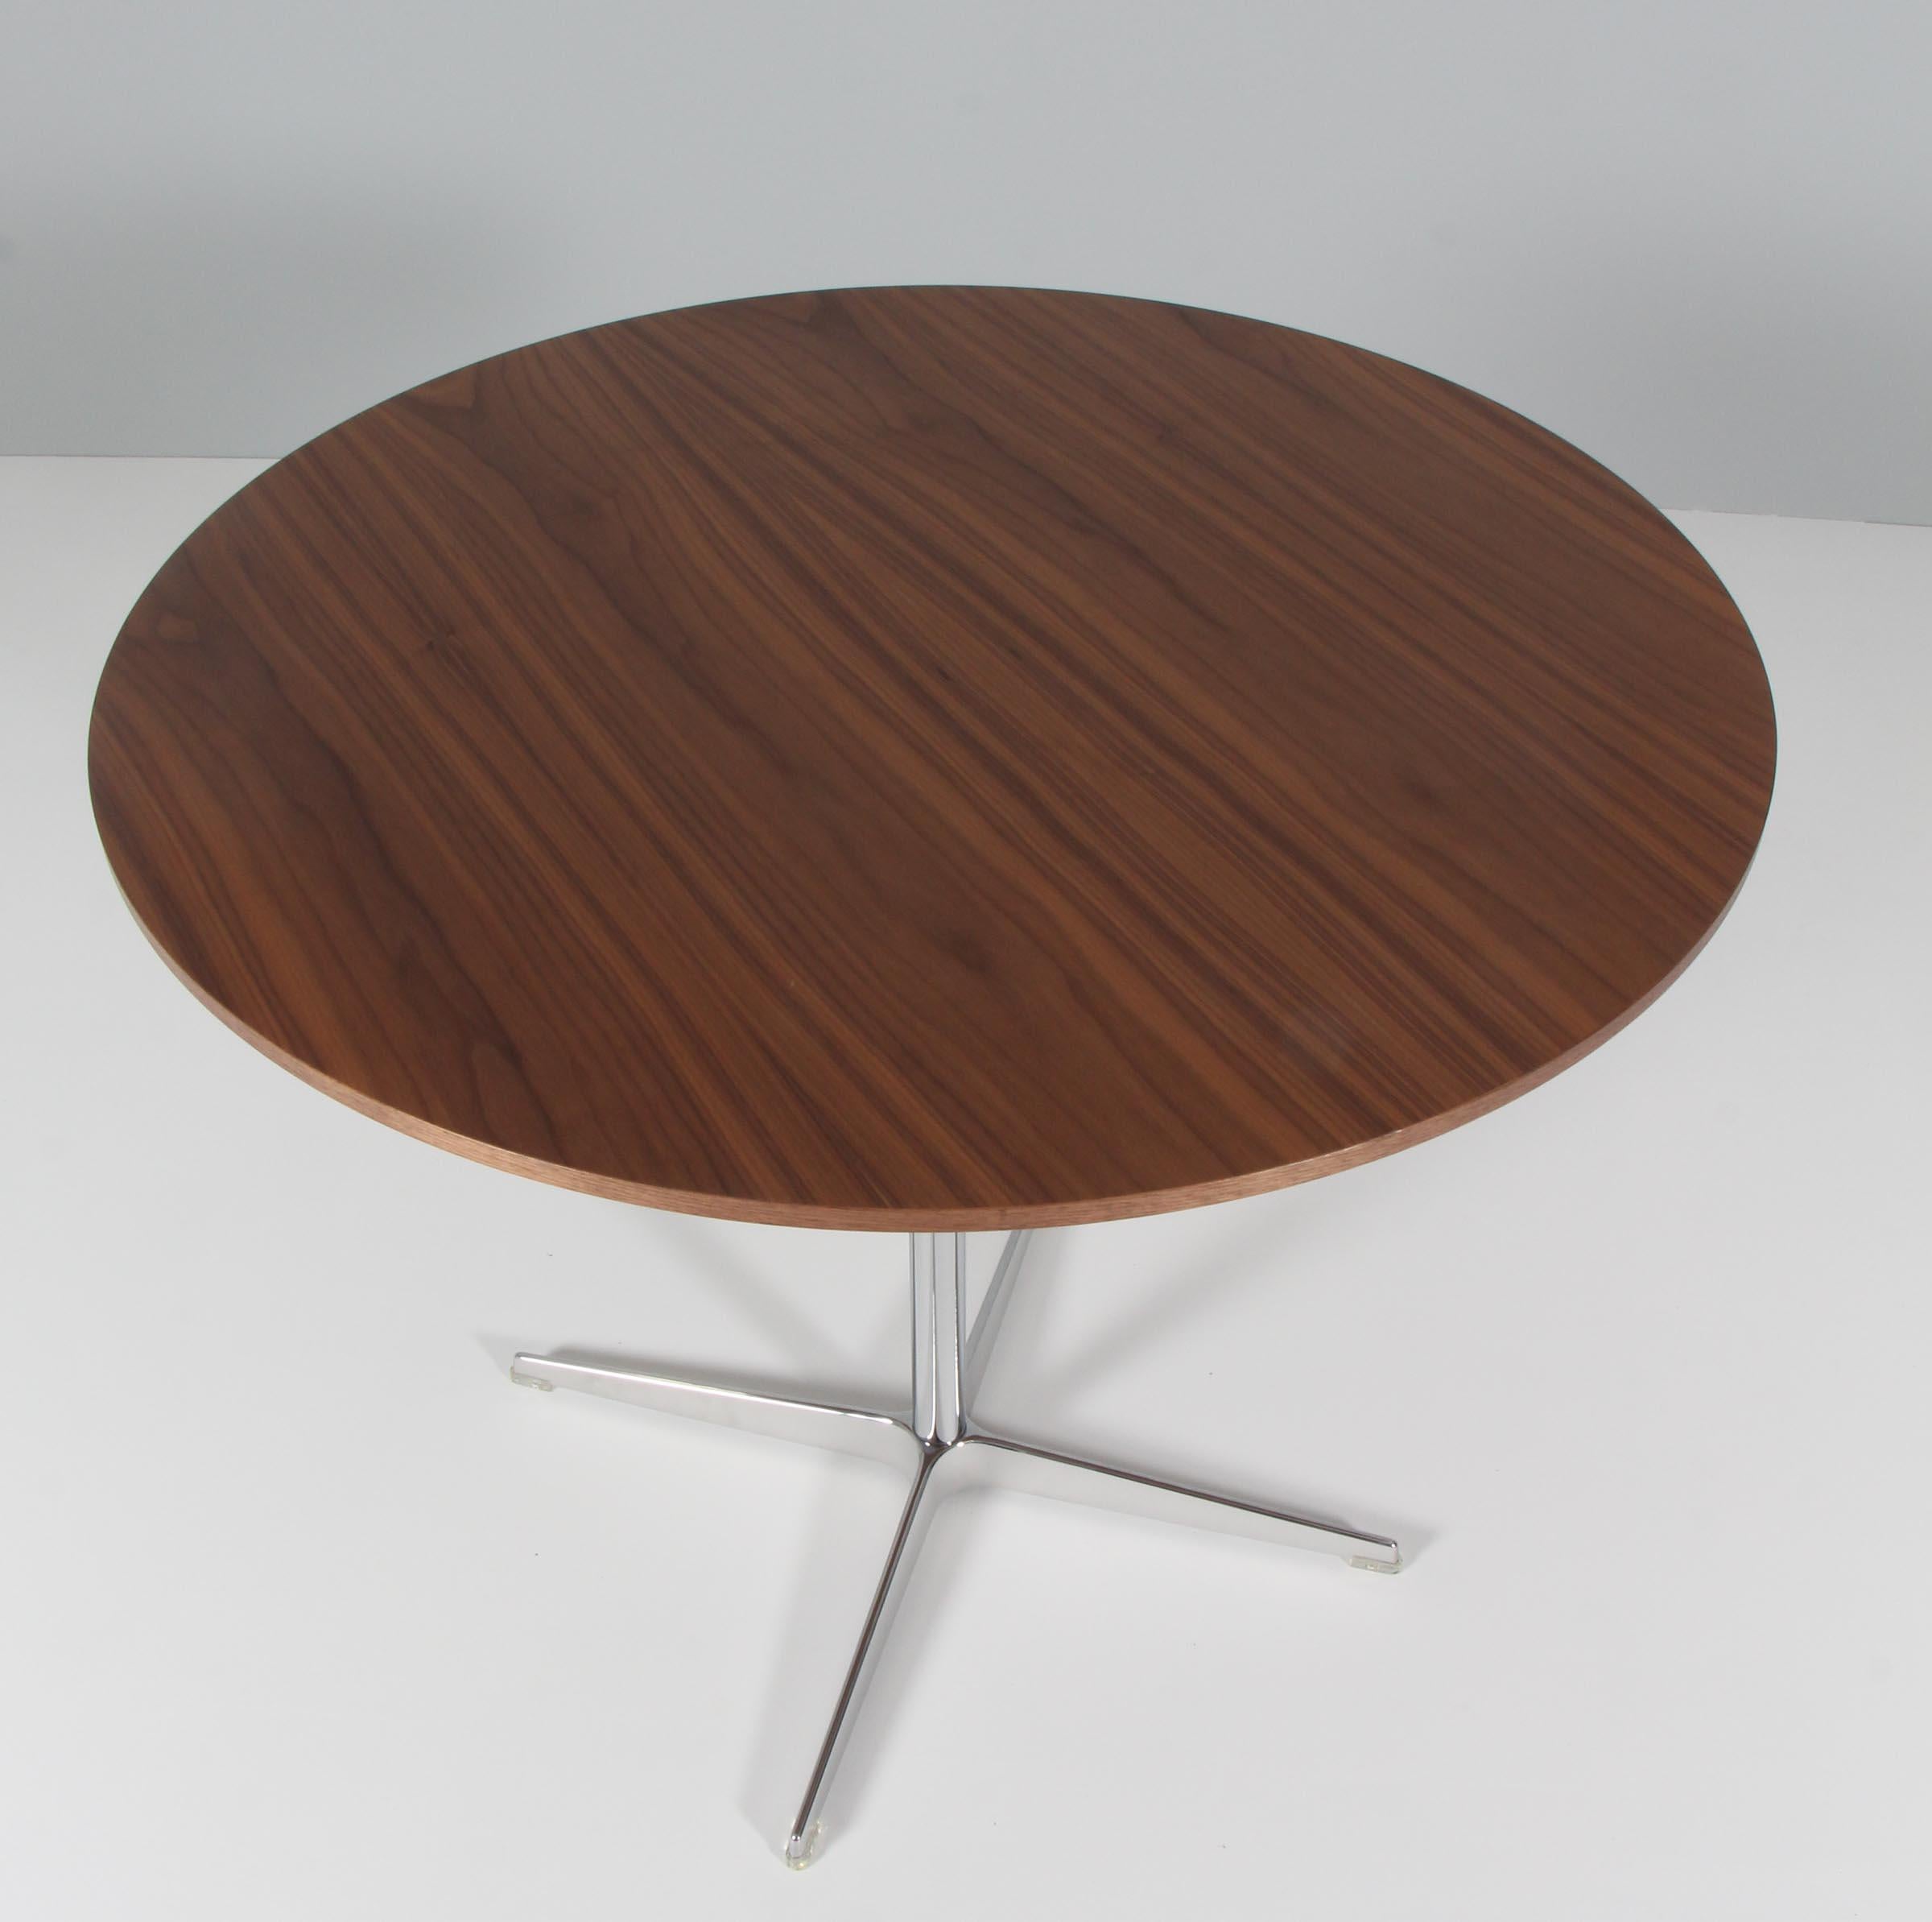 Piet Hein & Arne Jacobsen café table with plate of veenered walnut.

Four star base of aluminium and steel.

Made by Fritz Hansen.